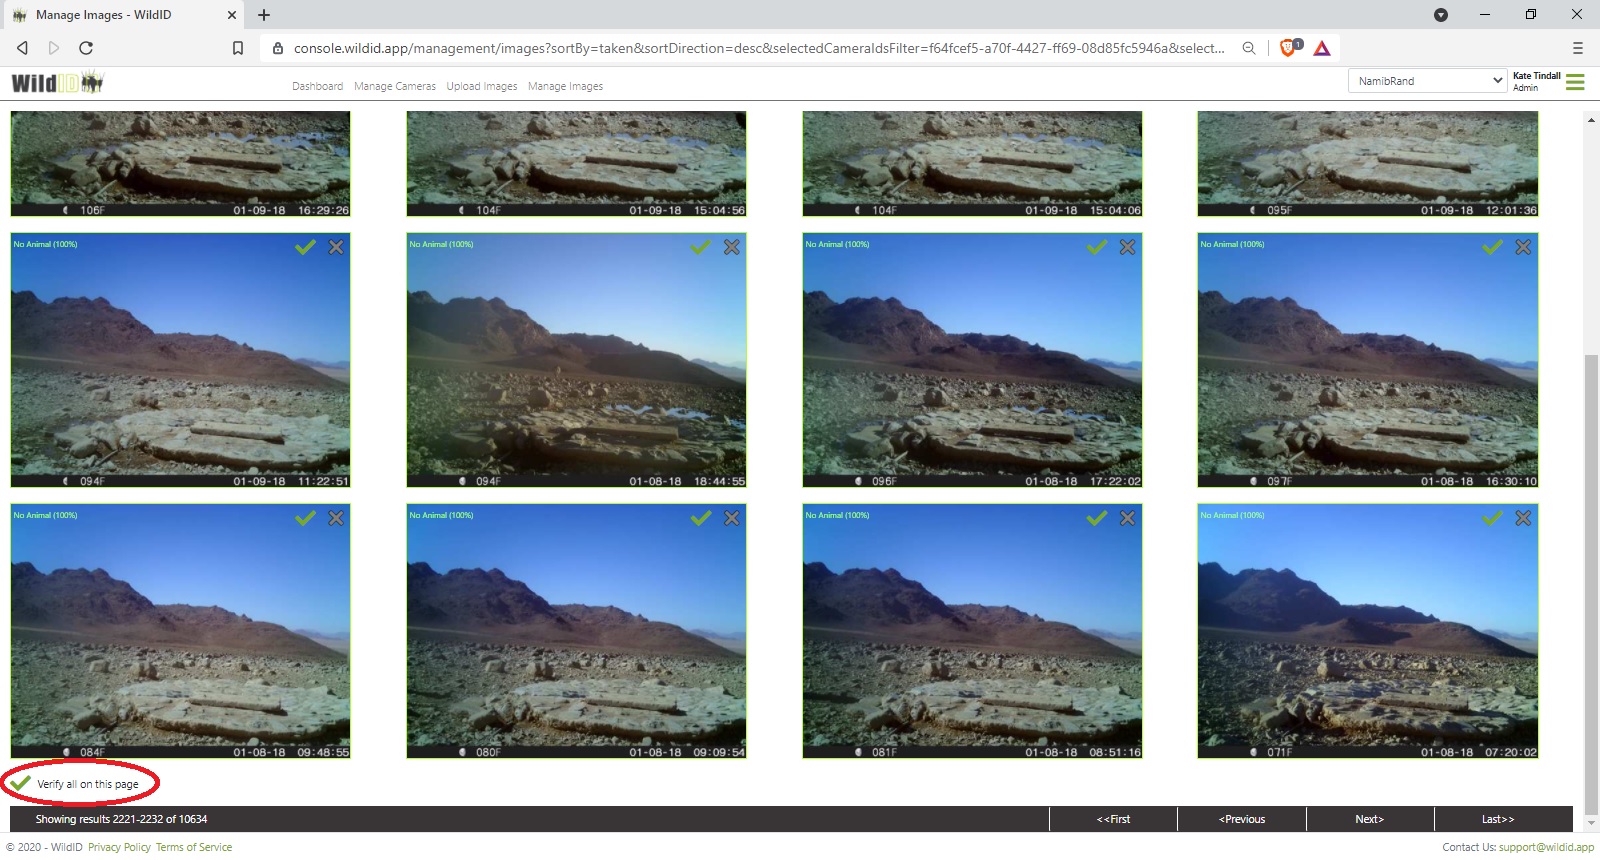 Example WildID screen showing verifying all images in search result page in one go.